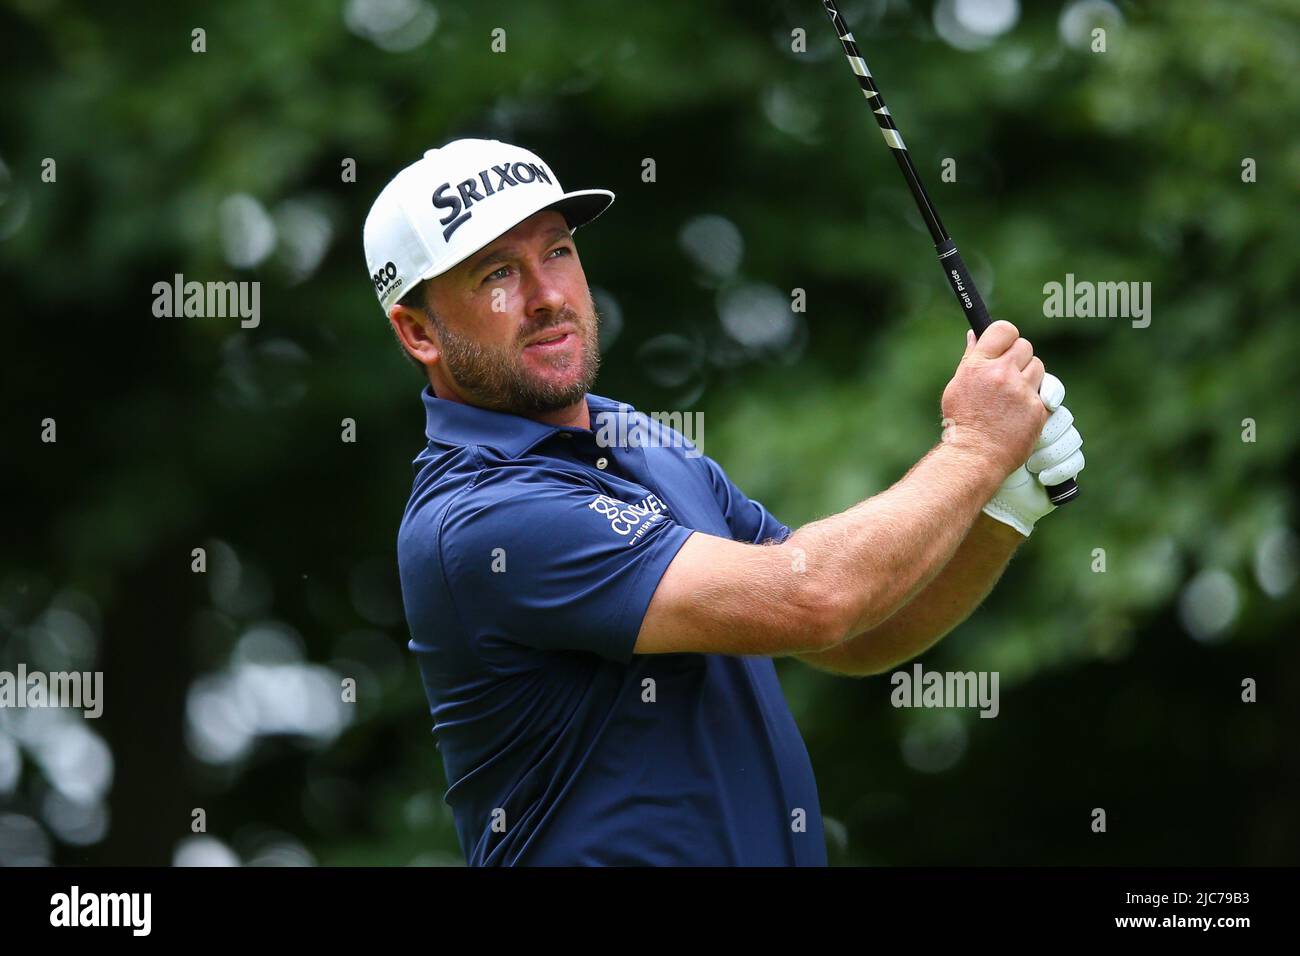 ST ALBANS, ENGLAND - JUNE 09: Graeme McDowell of Northern Ireland tees off on the 4th hole during day one of the LIV Golf Invitational at The Centurion Club on June 9, 2022 in St Albans, England. (MB Media) Stock Photo